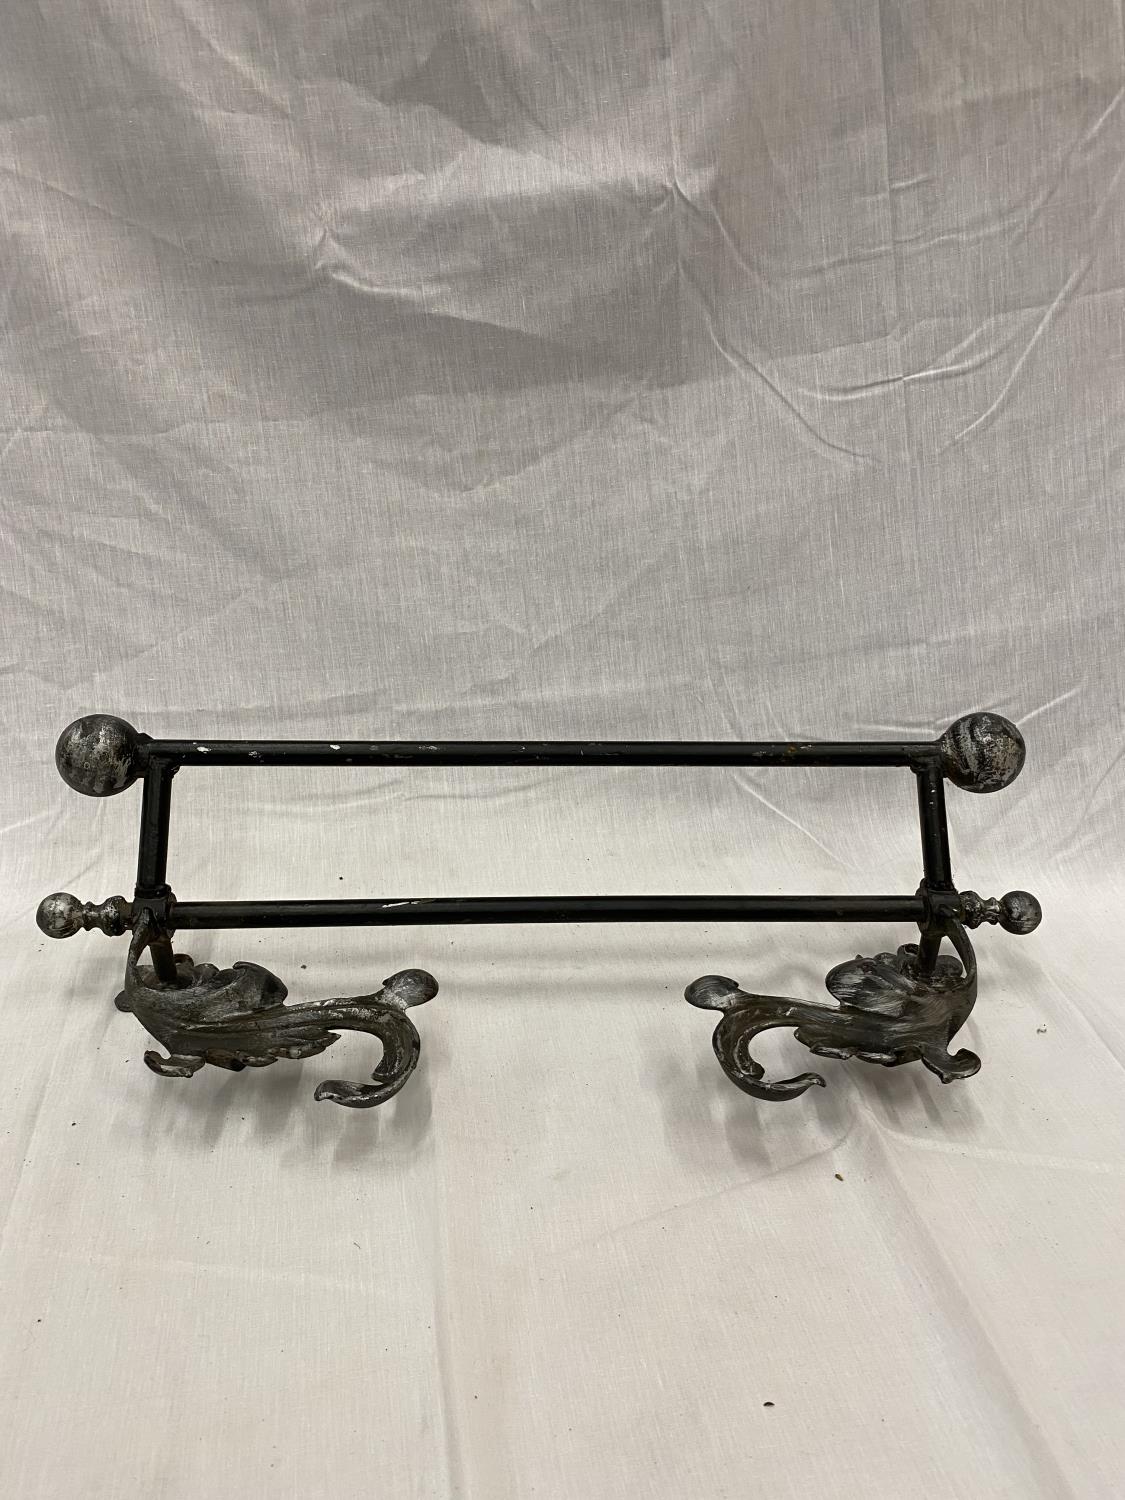 A DECORATIVE WROUGHT IRON WALL MOUNTED RACK/RAIL - Image 5 of 12